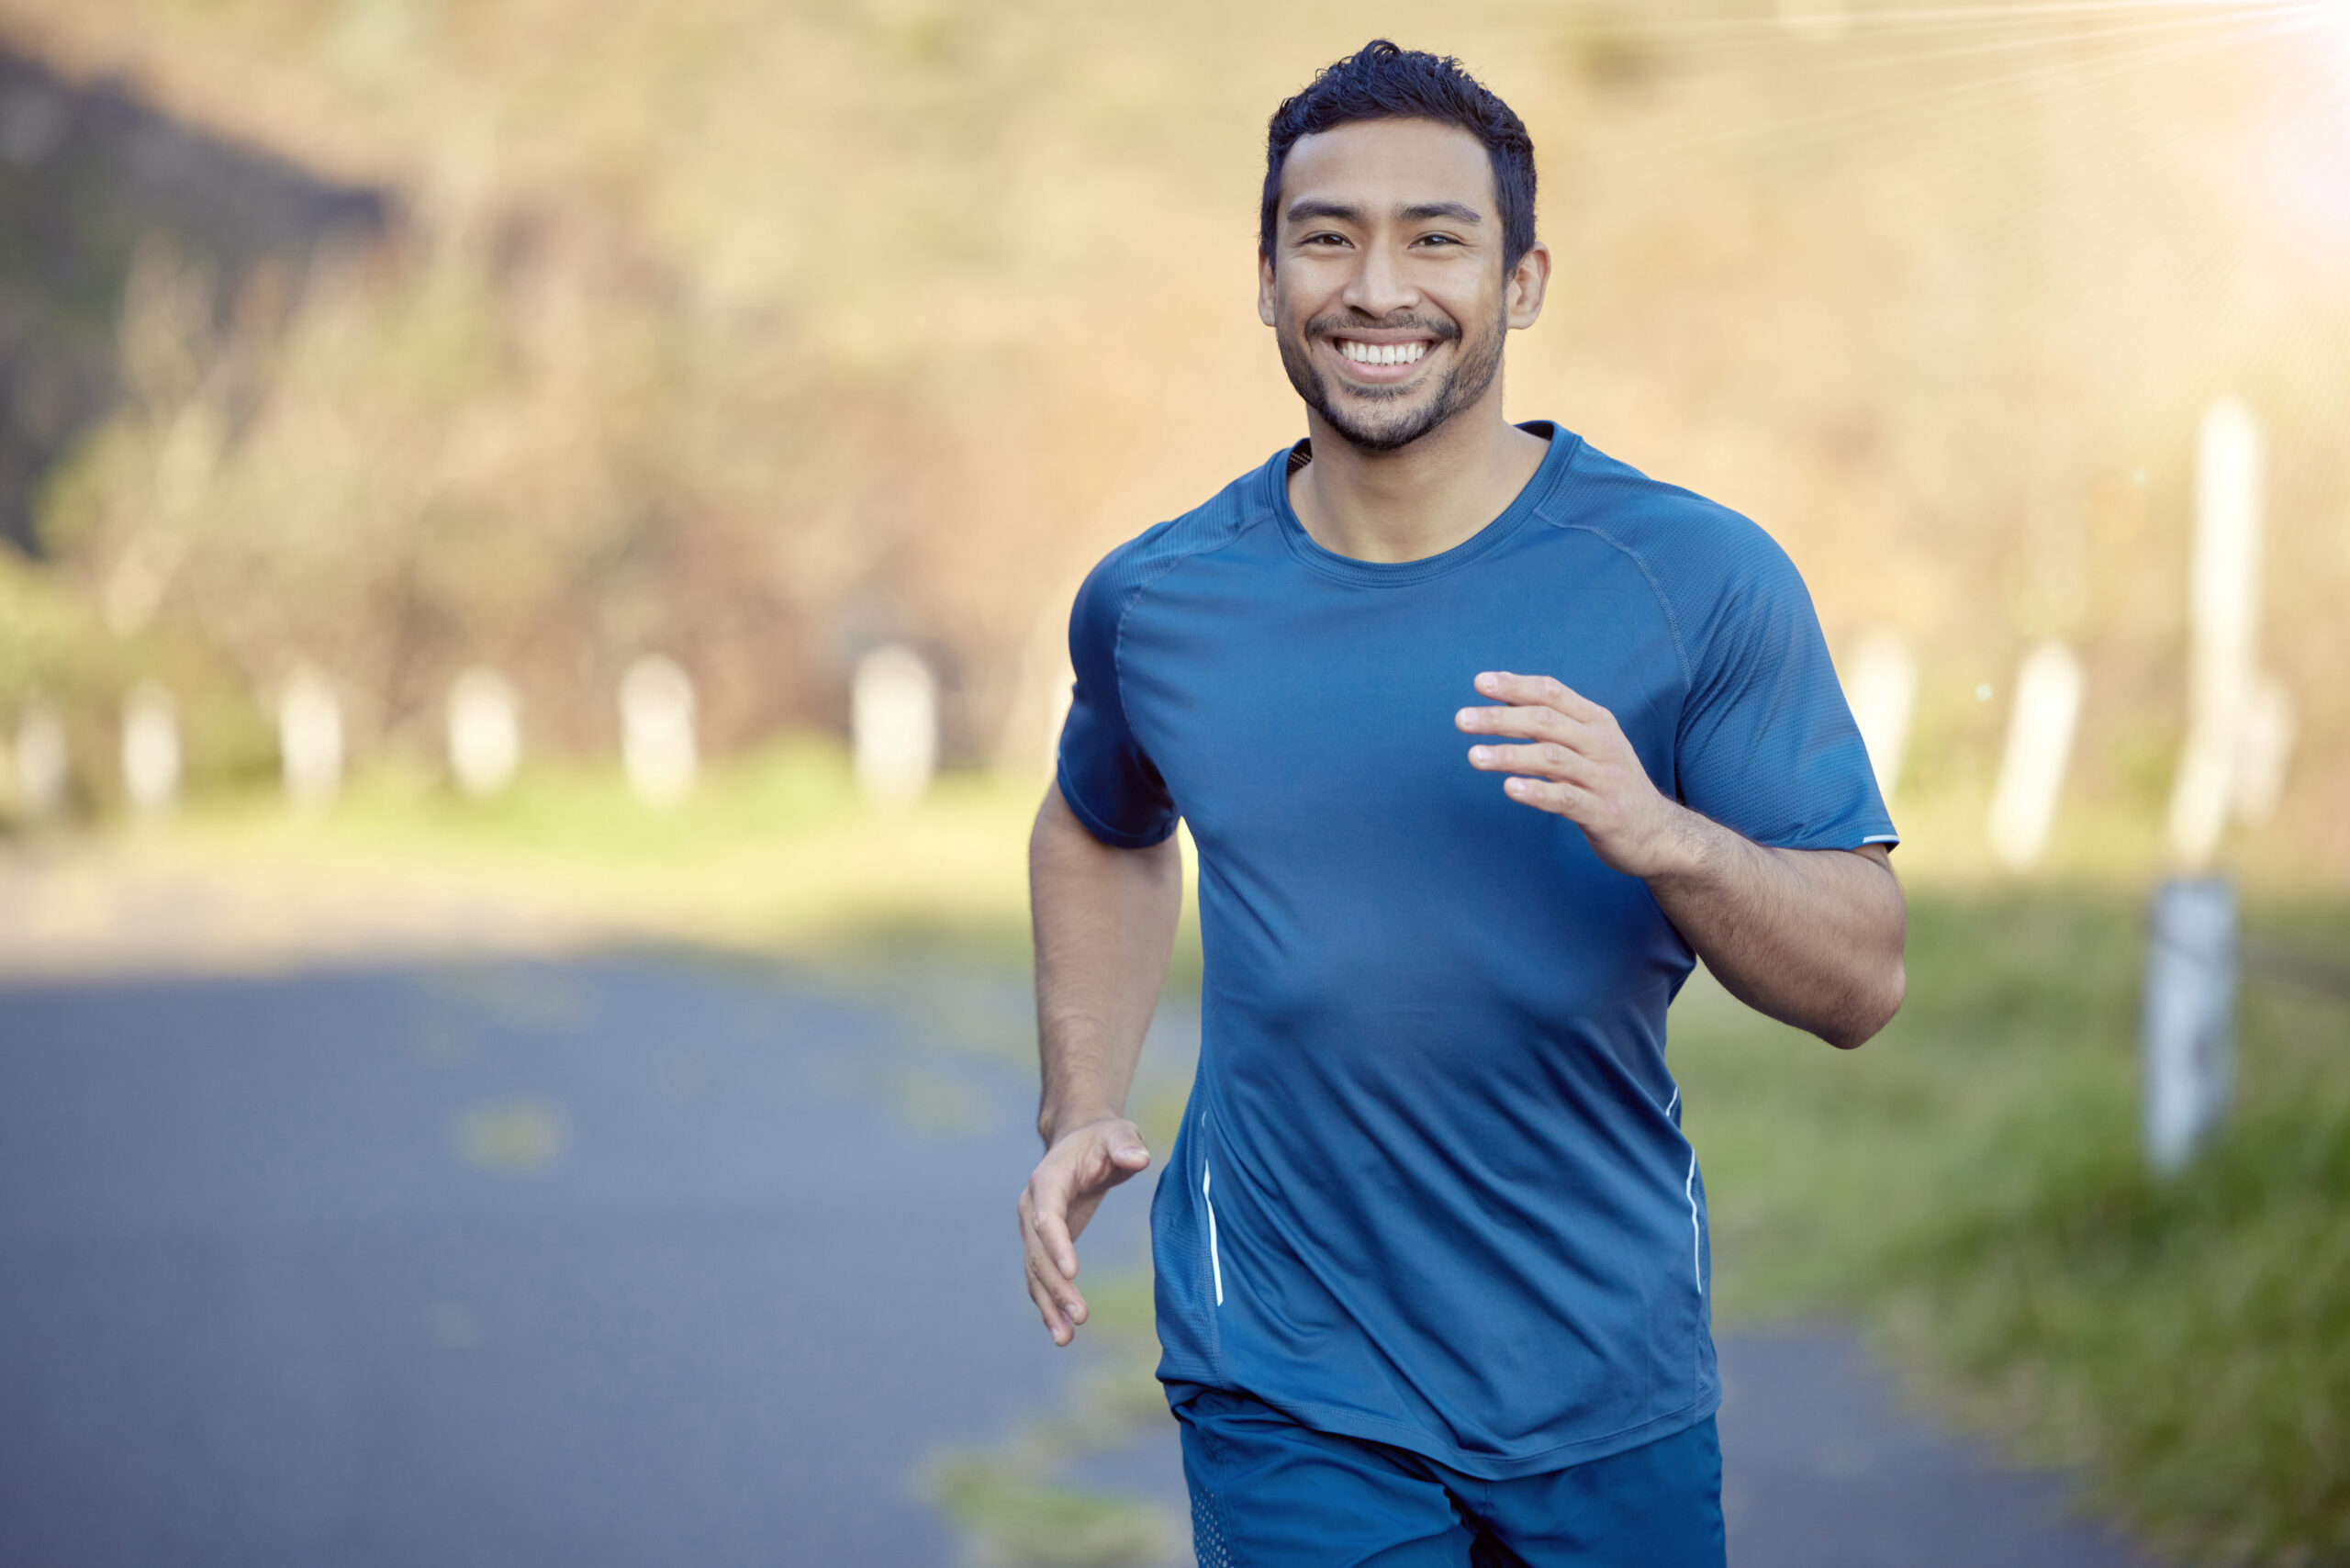 Man smiling and taking a run